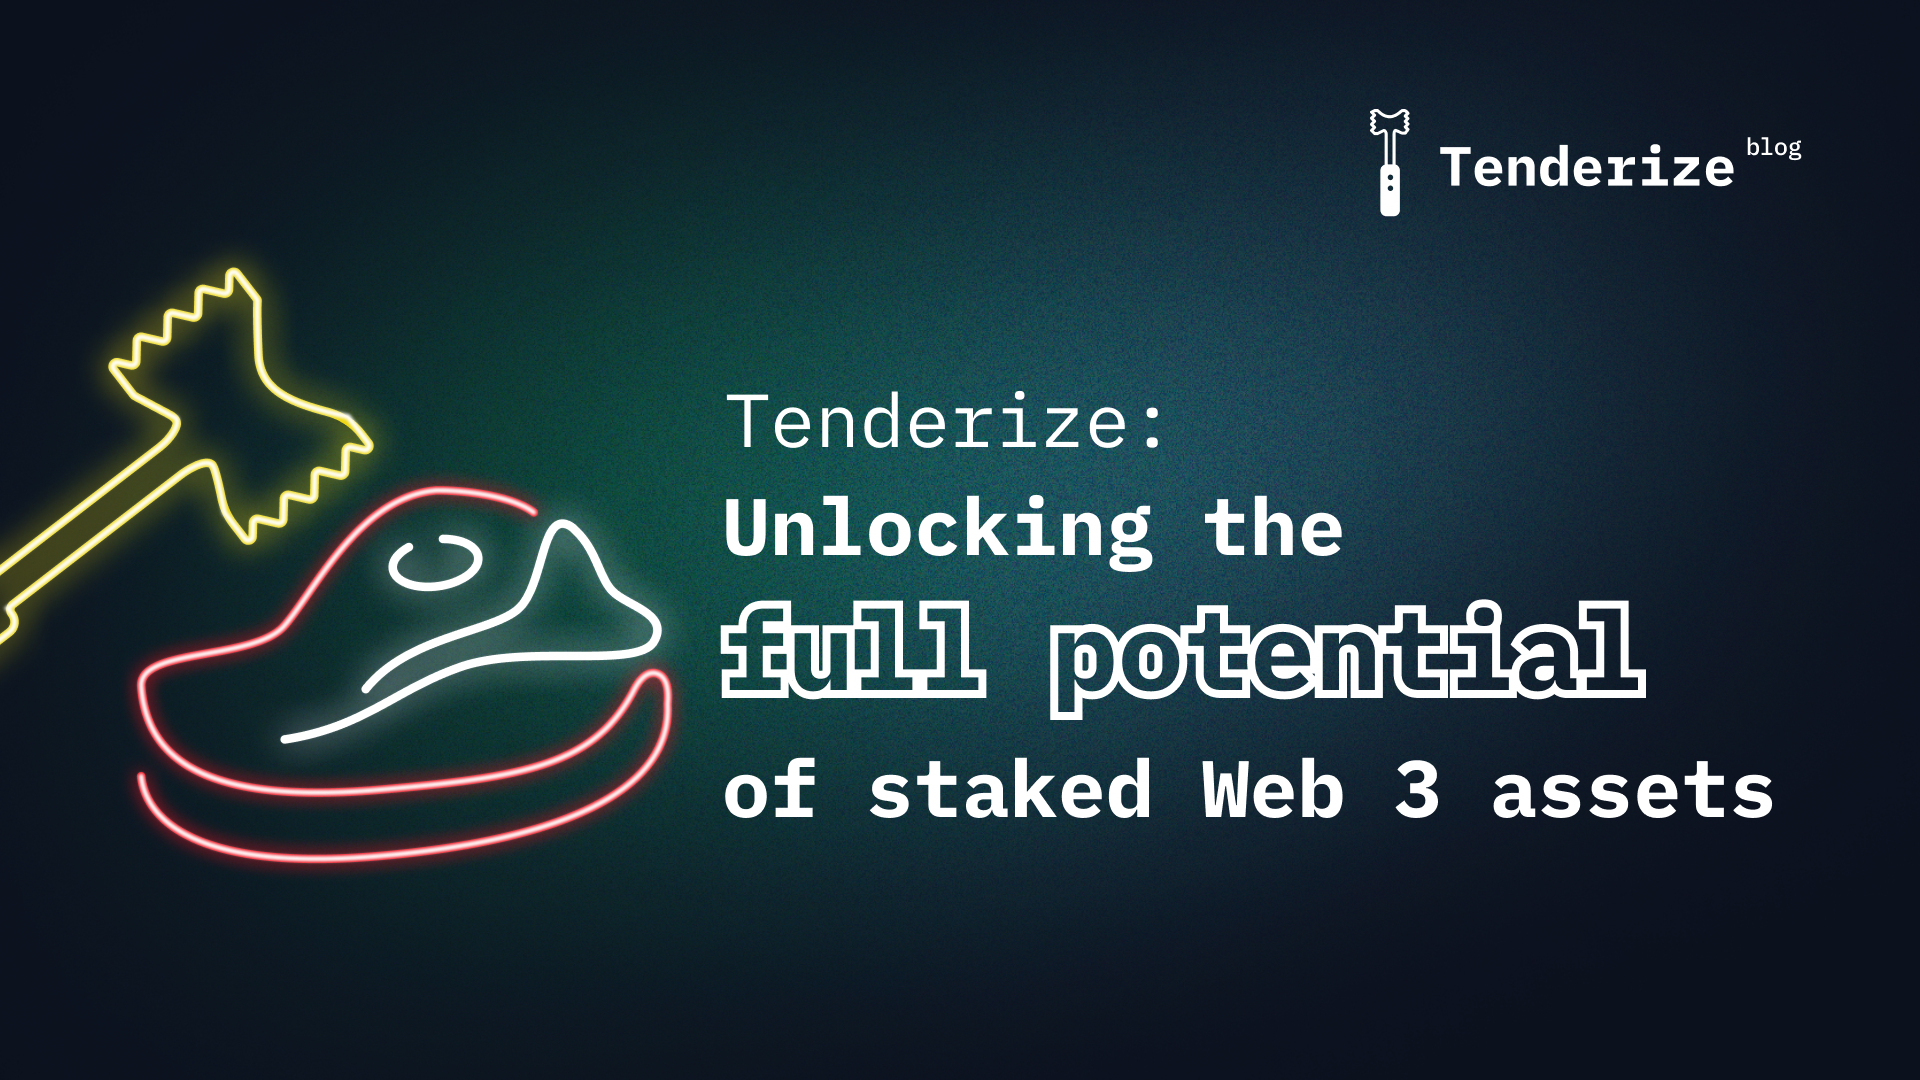 From idea to protocol merging Web 3 and DeFi: How Tenderize came to fruition